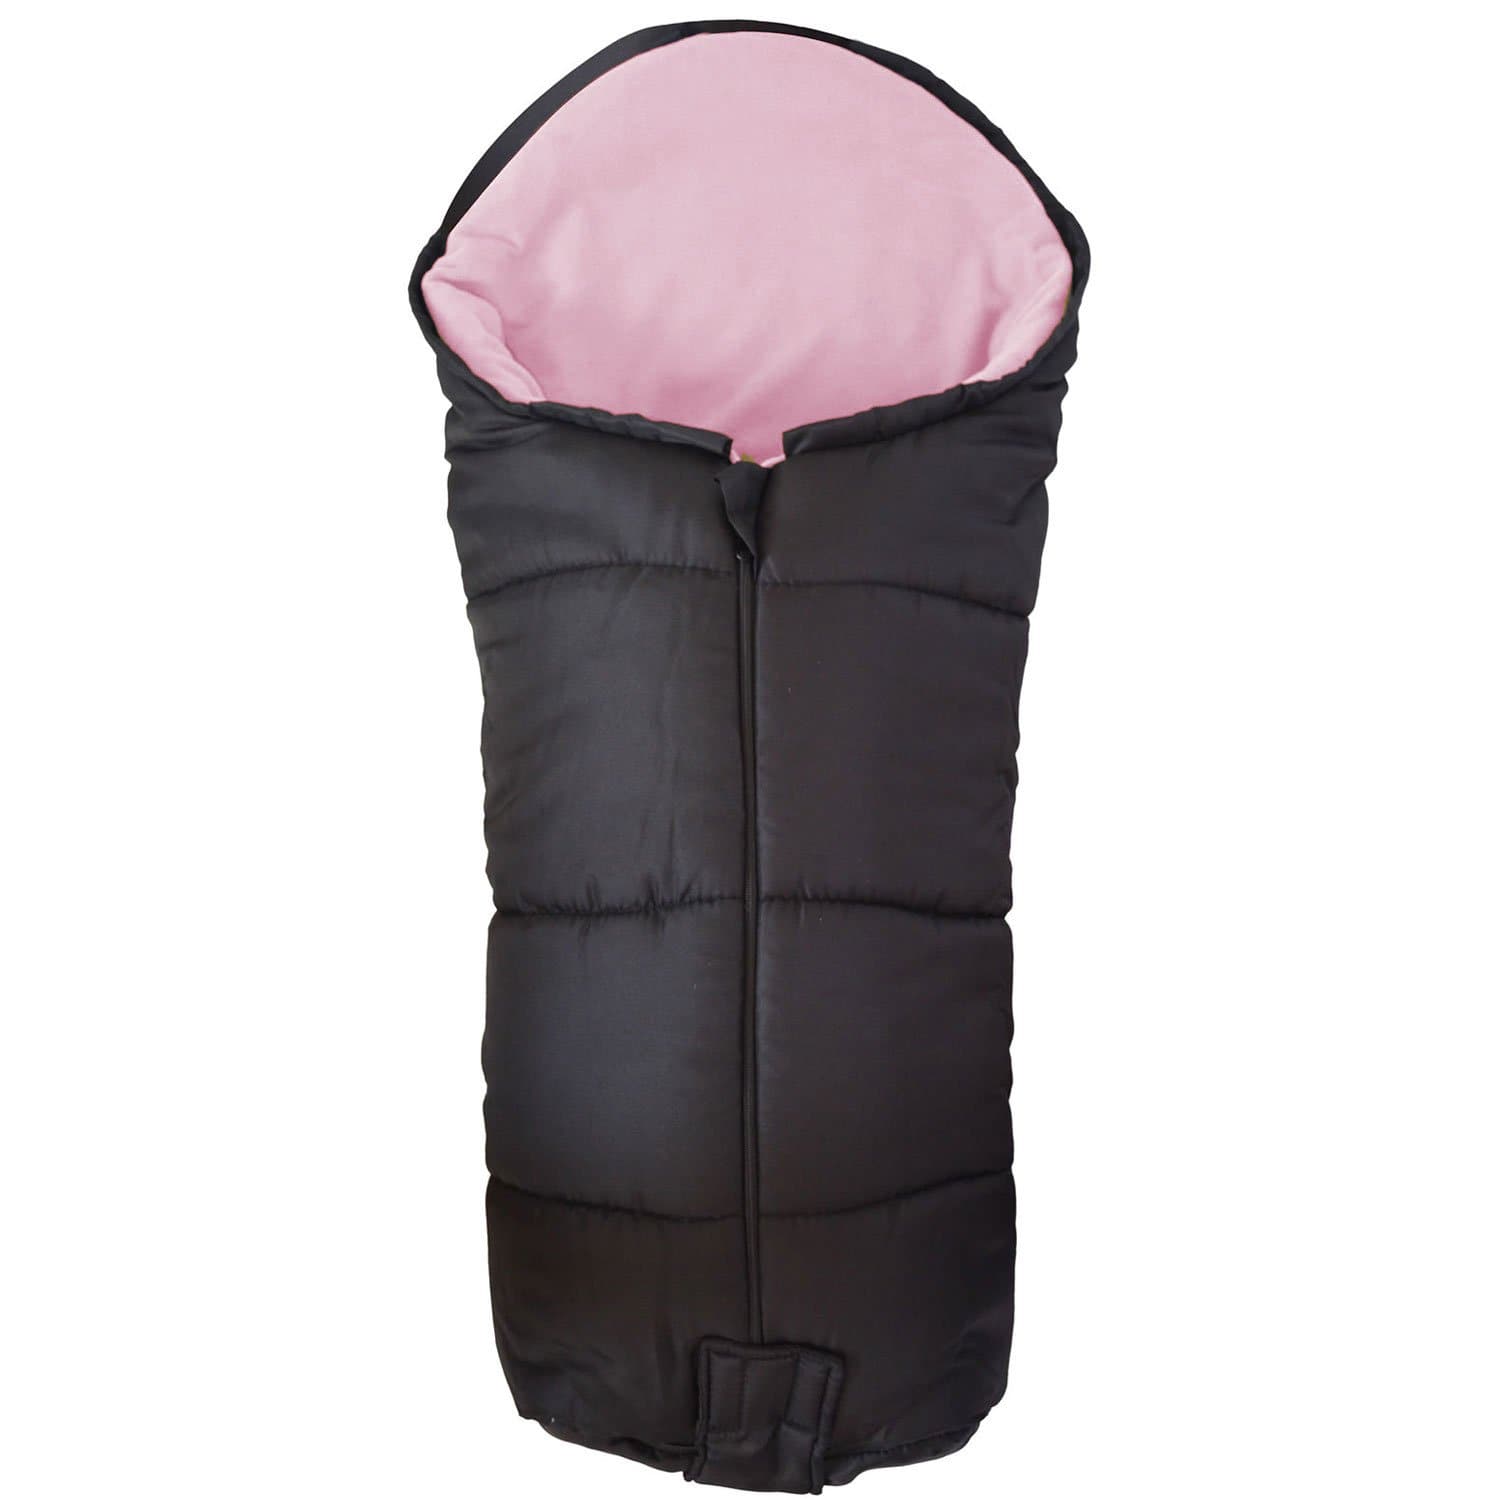 Universal Deluxe Pushchair Footmuff / Cosy Toes - Fits All Pushchairs / Prams And Buggies - Light Pink / Fits All Models | For Your Little One